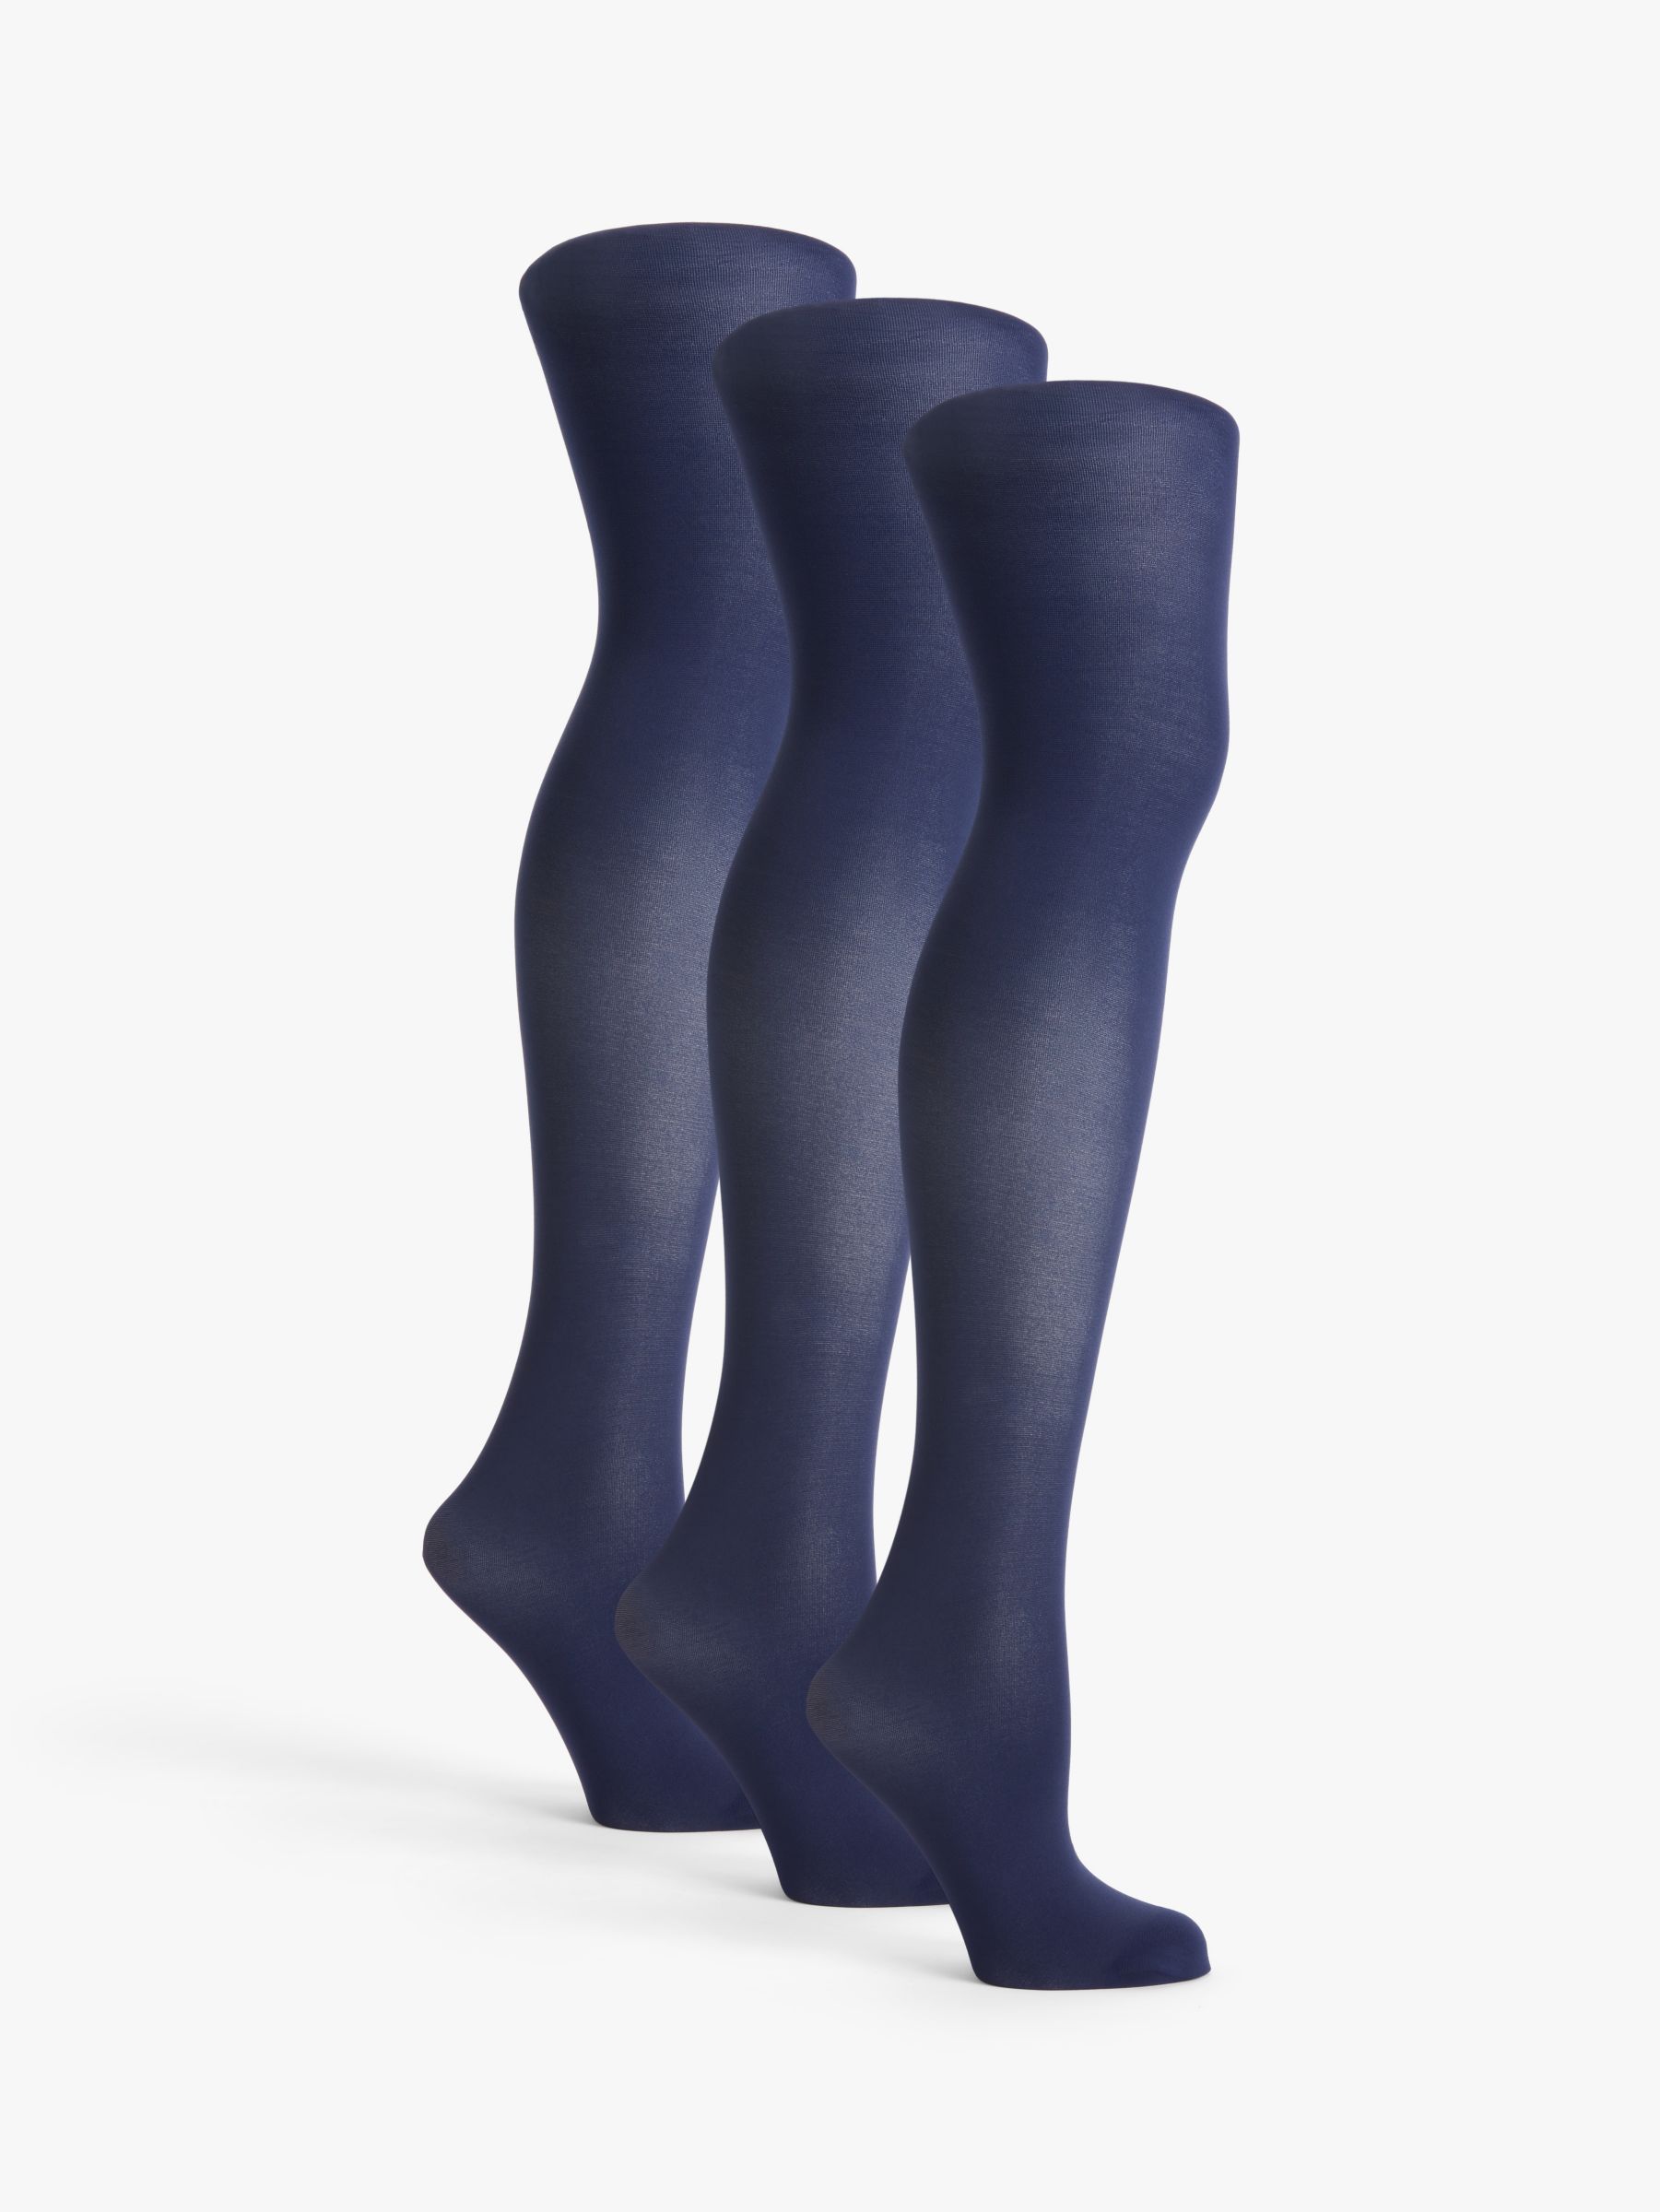 John Lewis ANYDAY 40 Denier Opaque Tights, Pack of 3, Navy at John